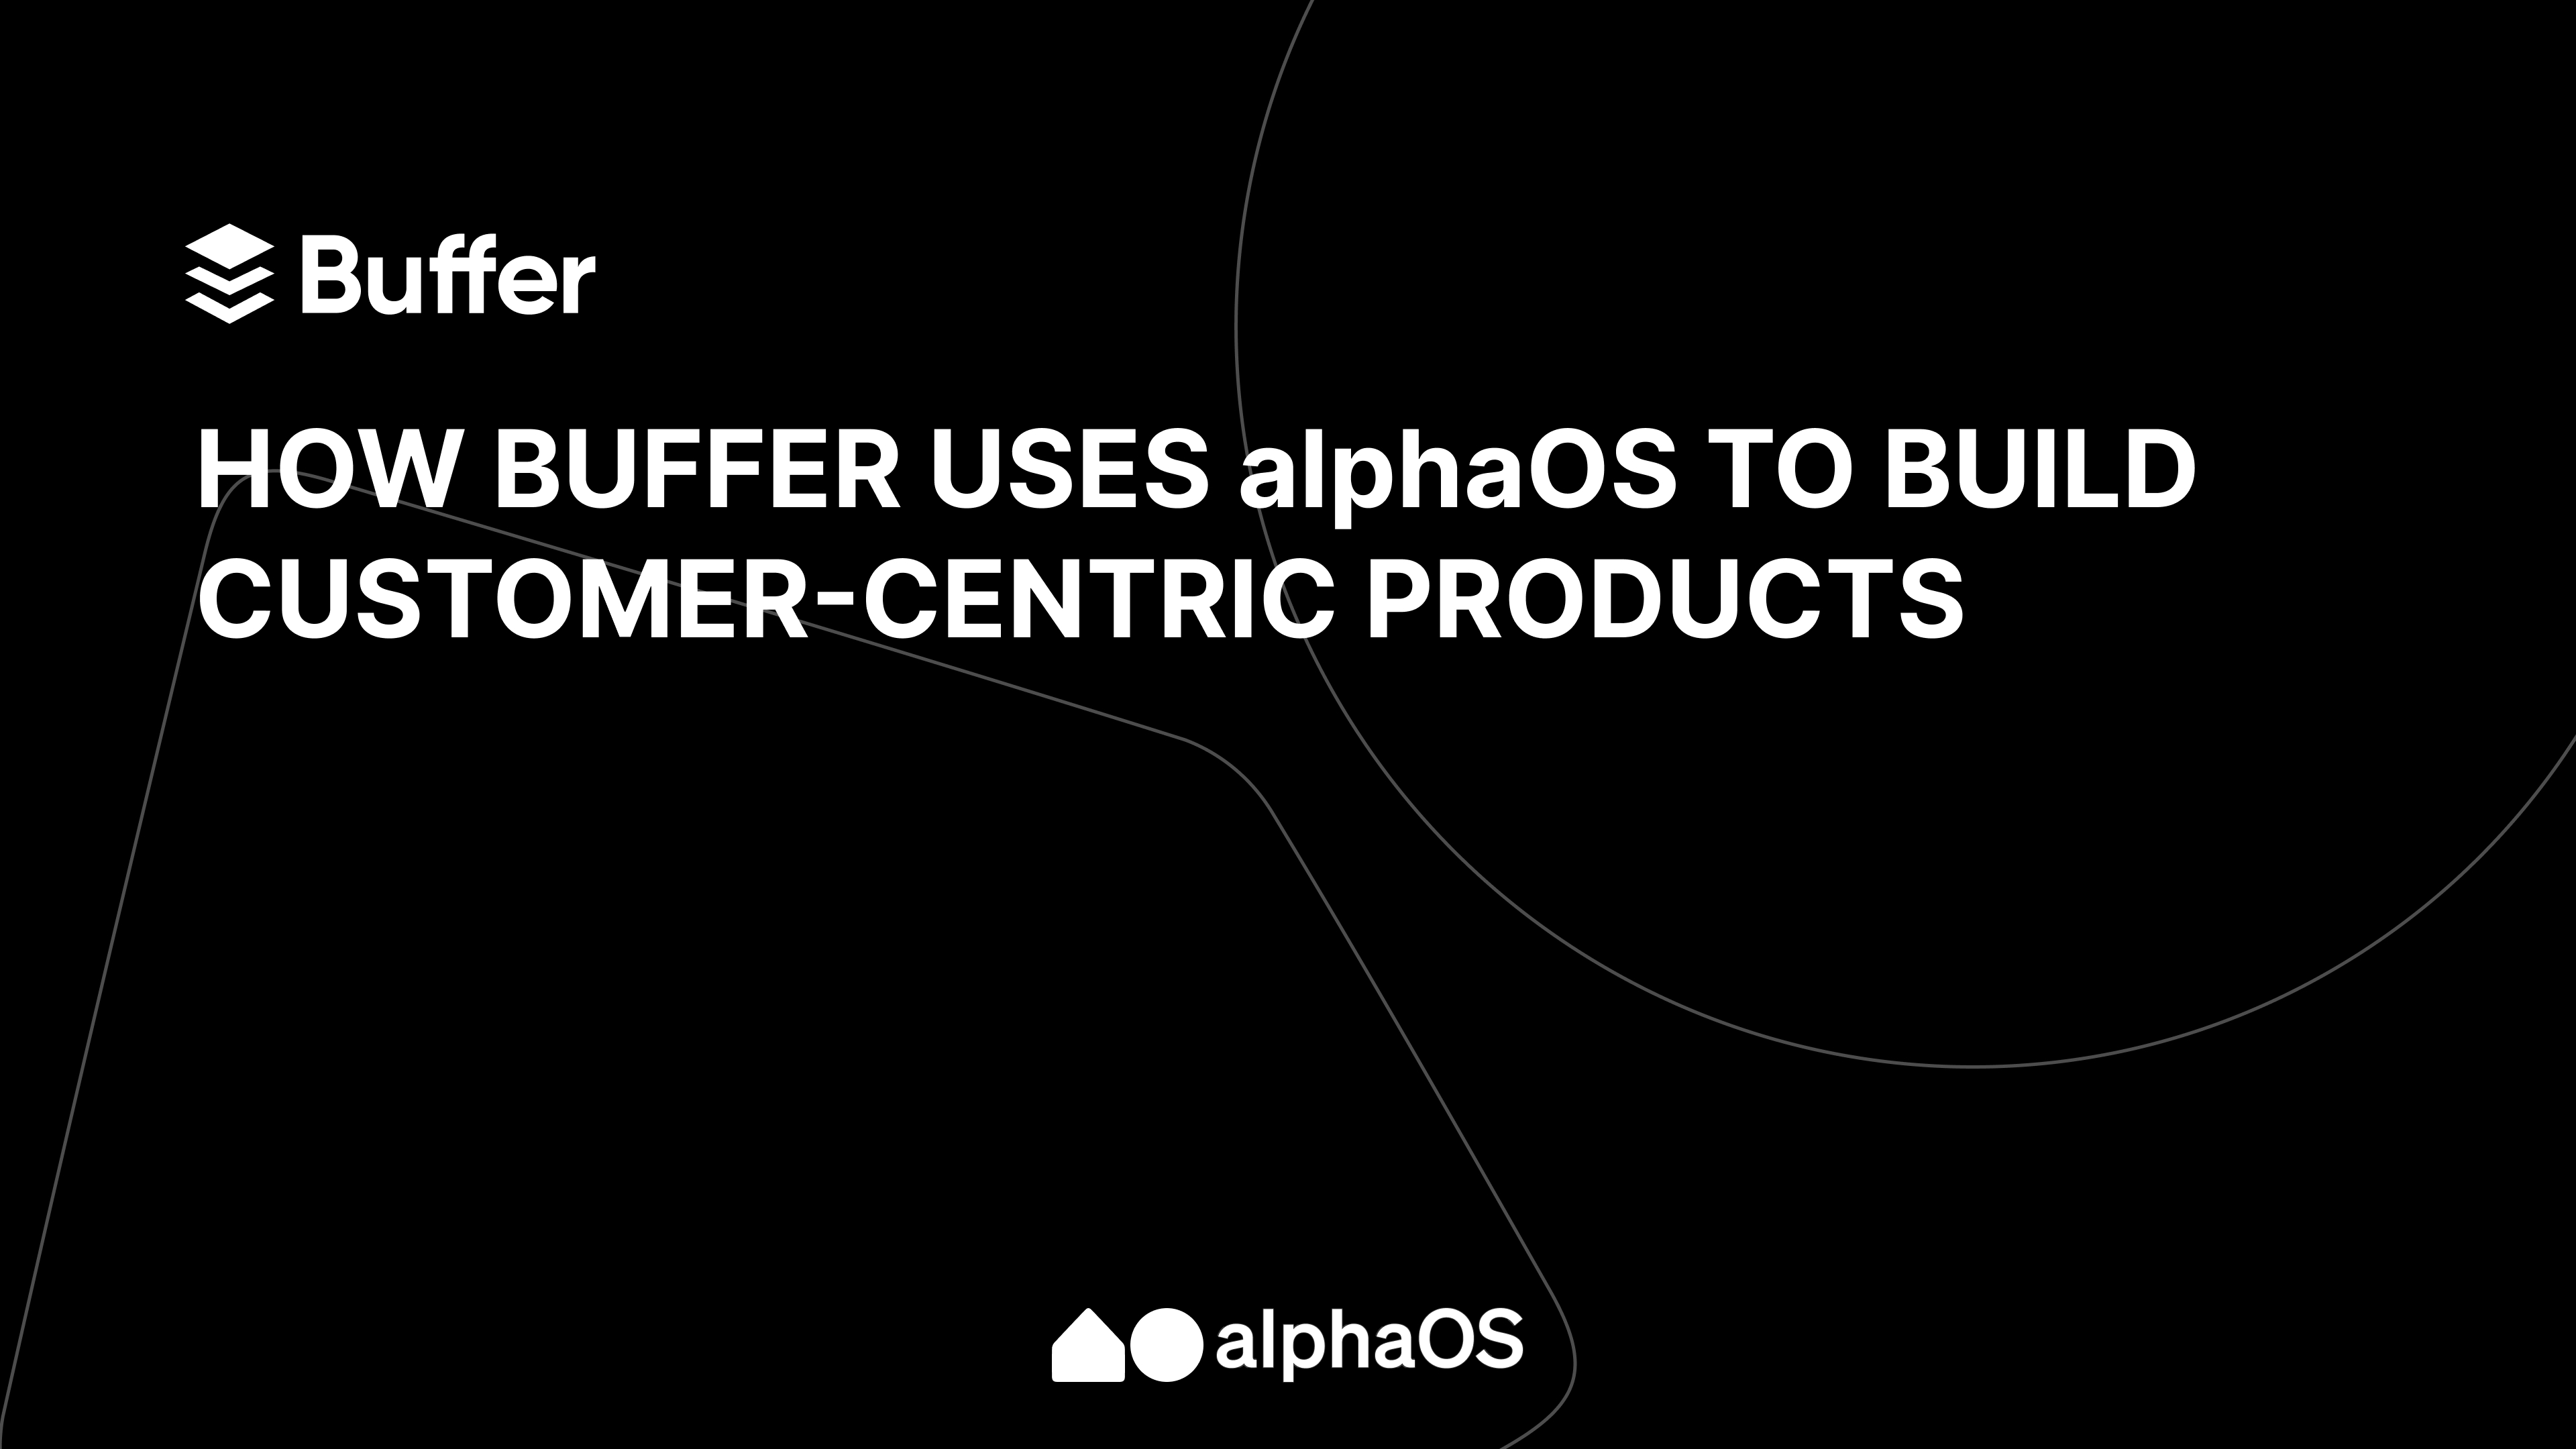 How Buffer uses alphaOS to build customer-centric products